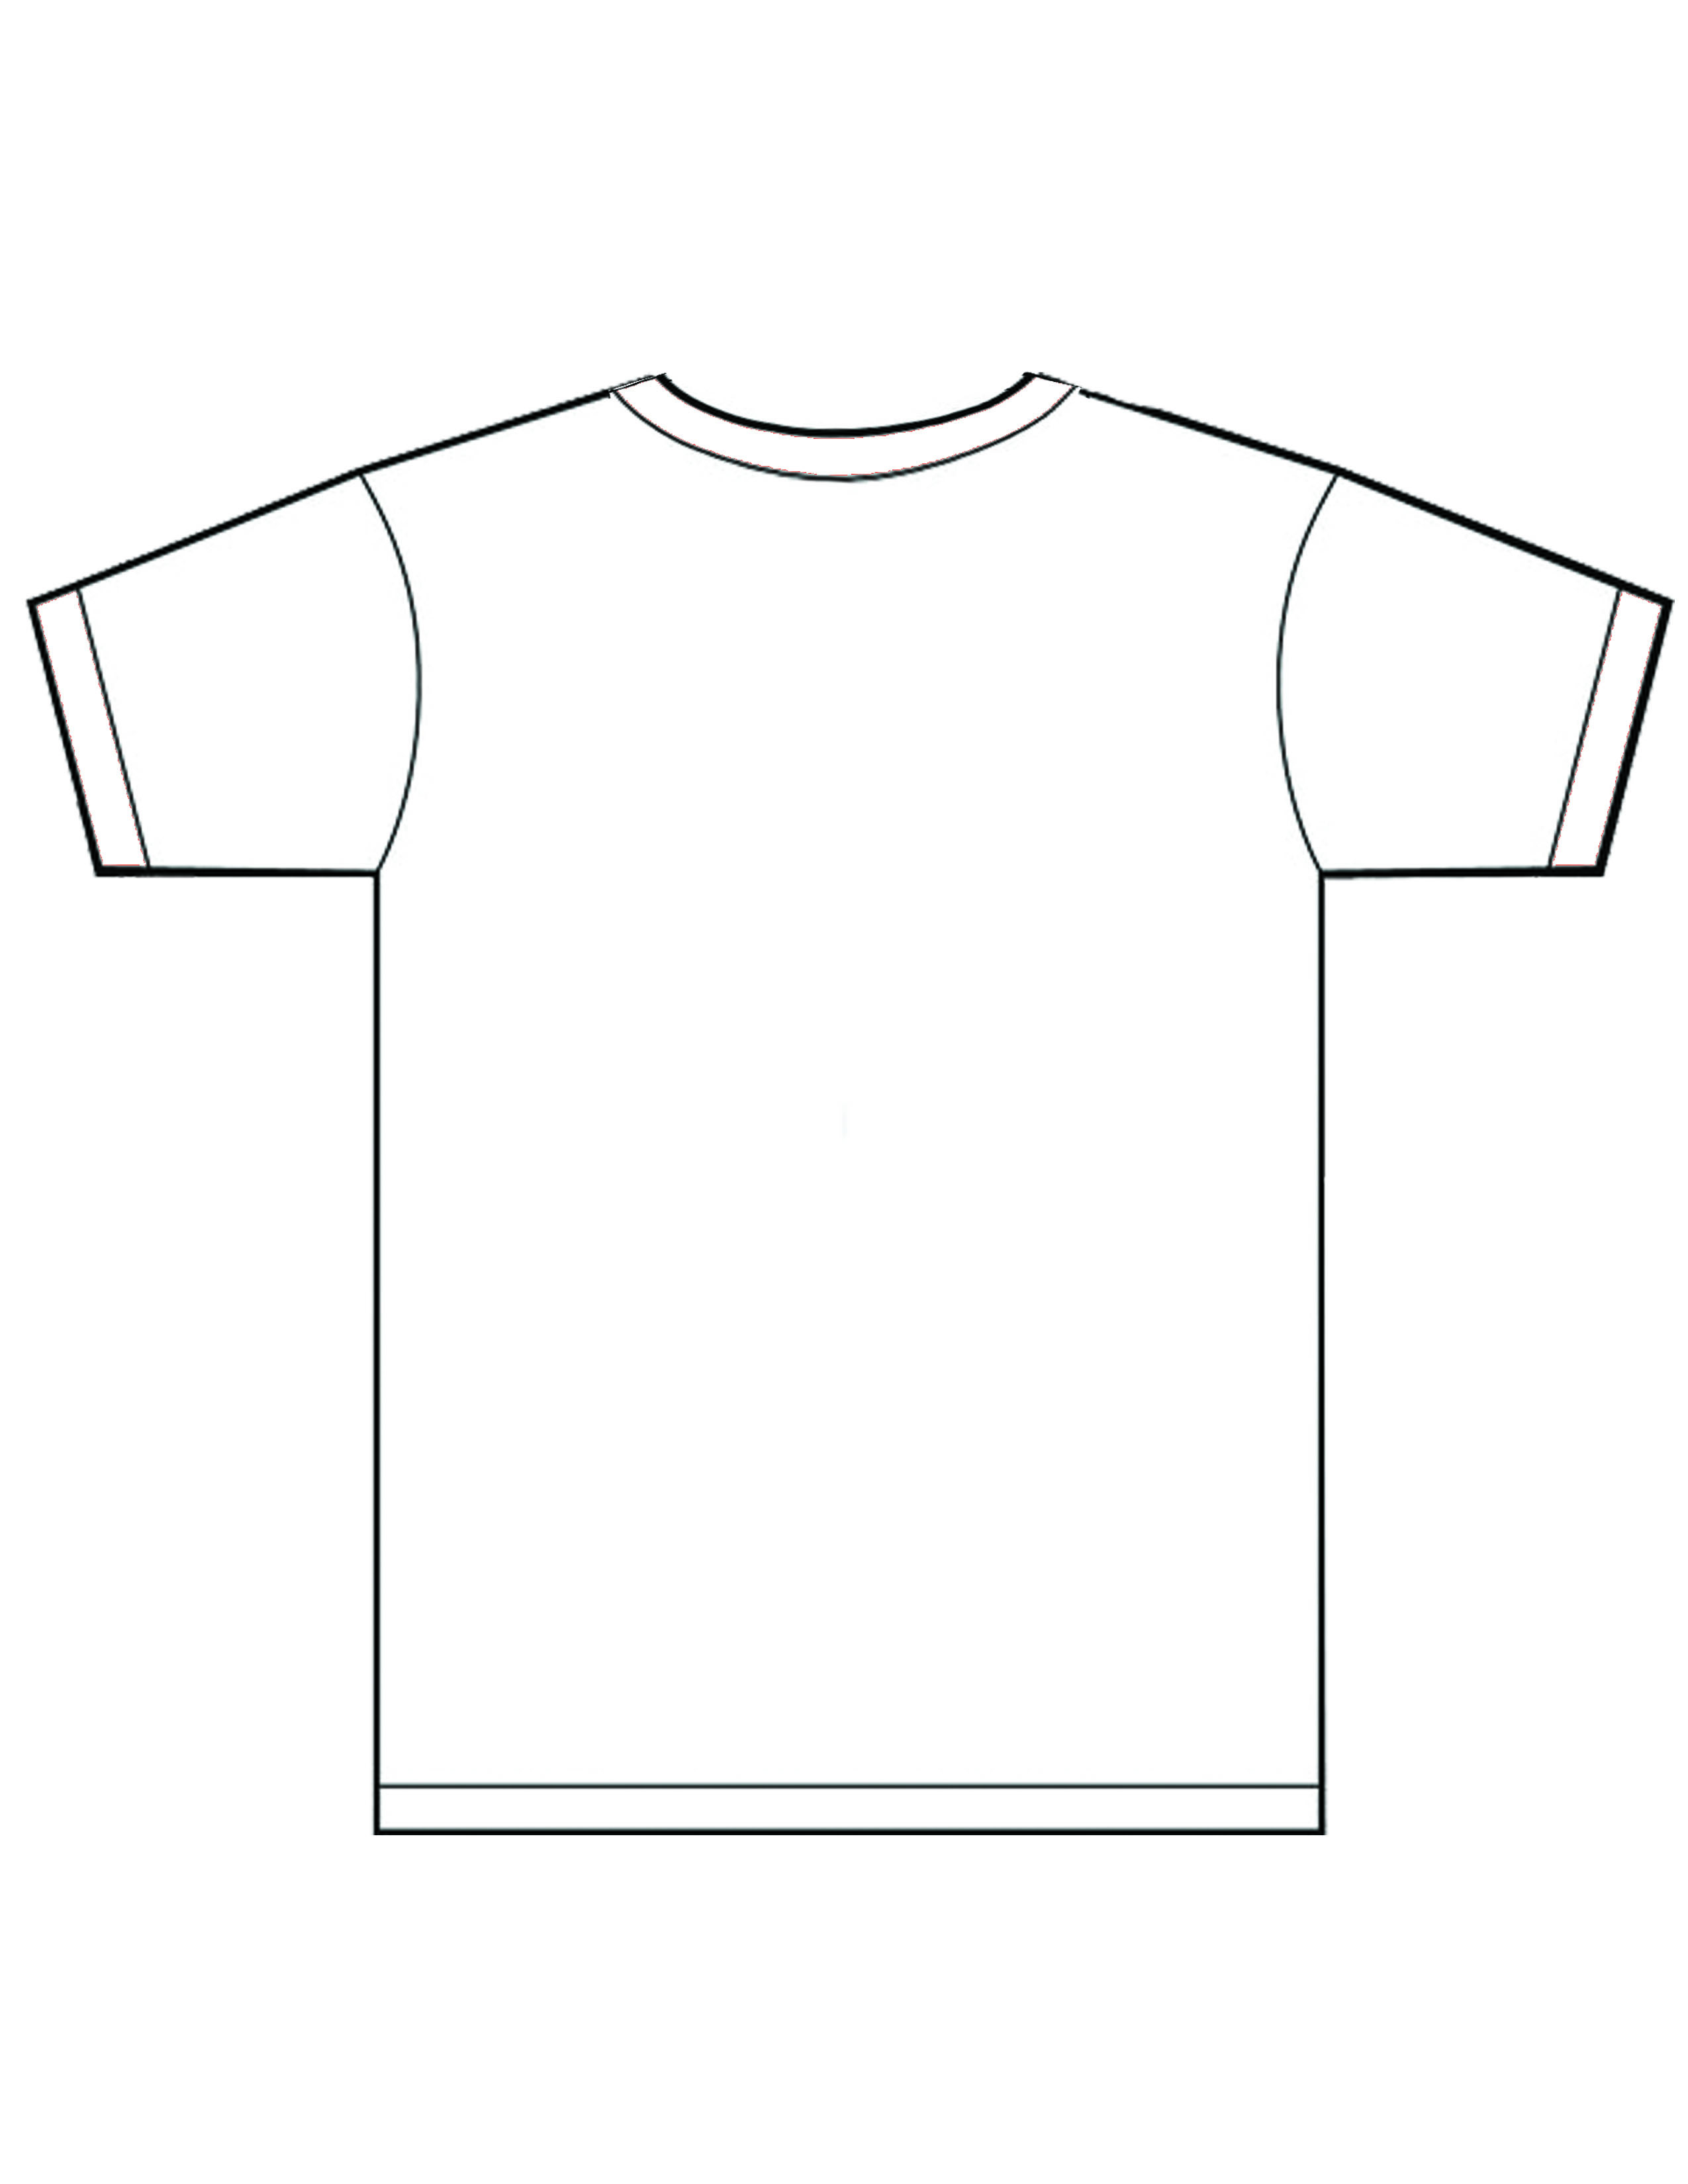 21 T-Shirt Template Front And Back Images - T-Shirt Template Back Within Blank Tshirt Template Pdf